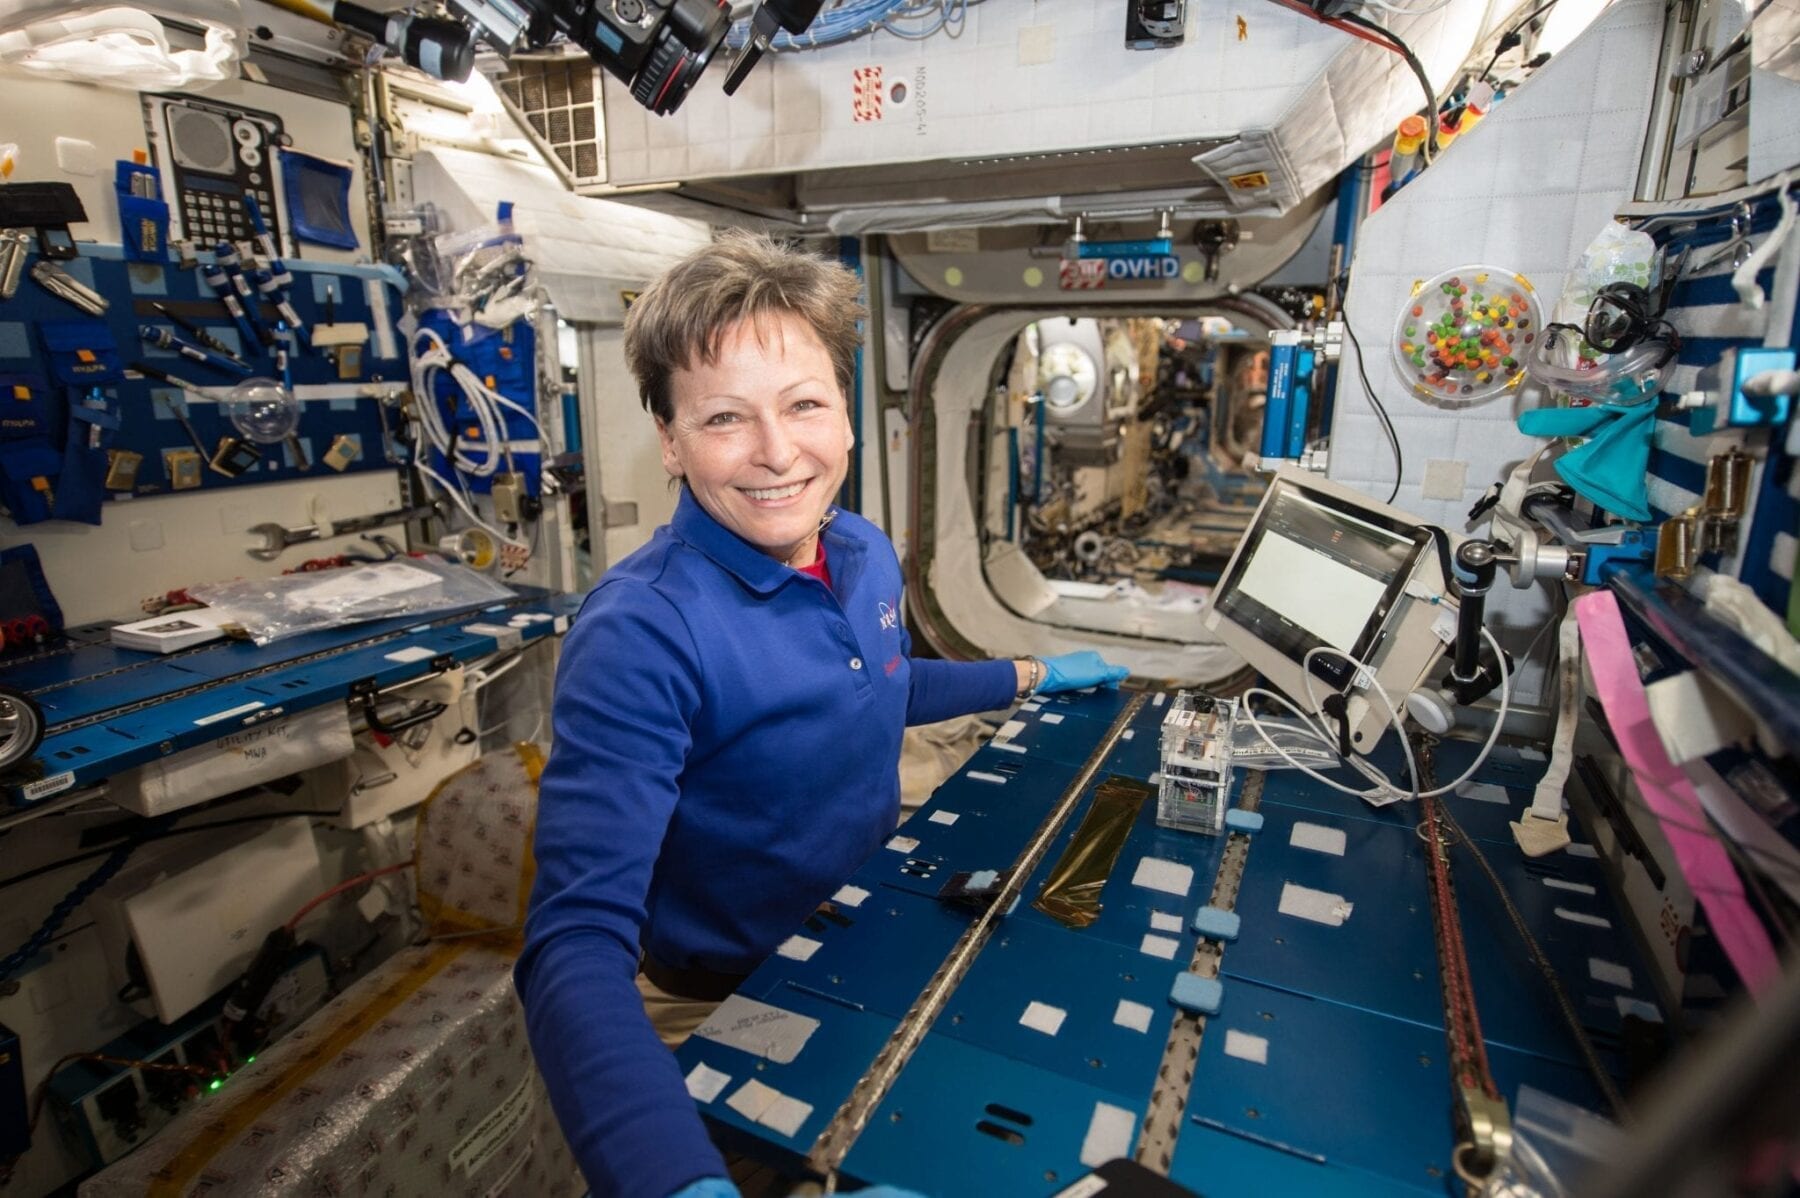 Identifying unknown microbes in space in real time